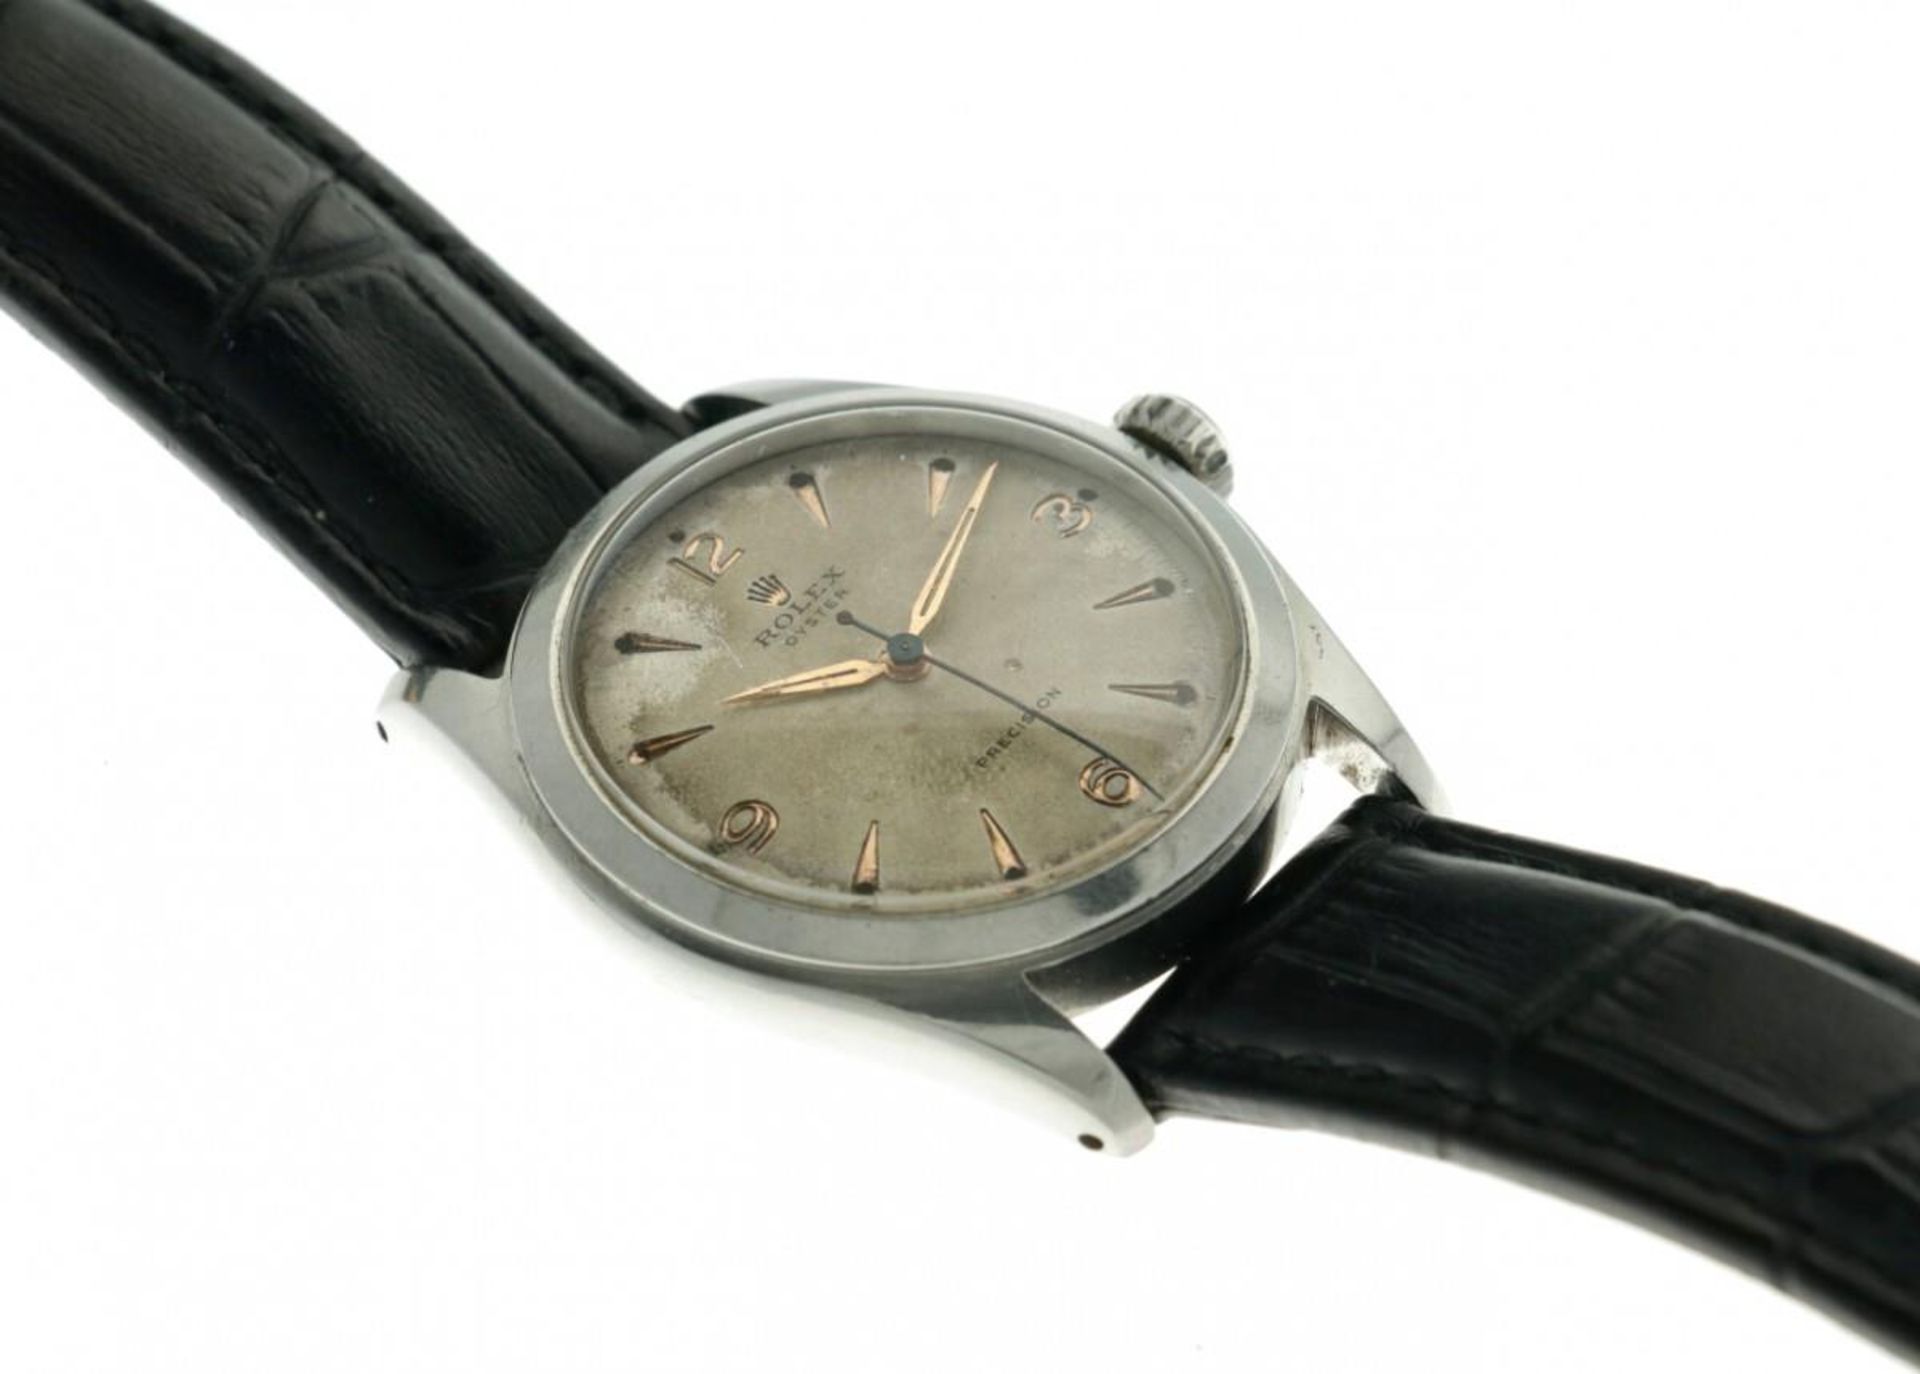 Rolex Oyster Precision 6082 - Men's watch - apprx. 1950. - Image 6 of 7